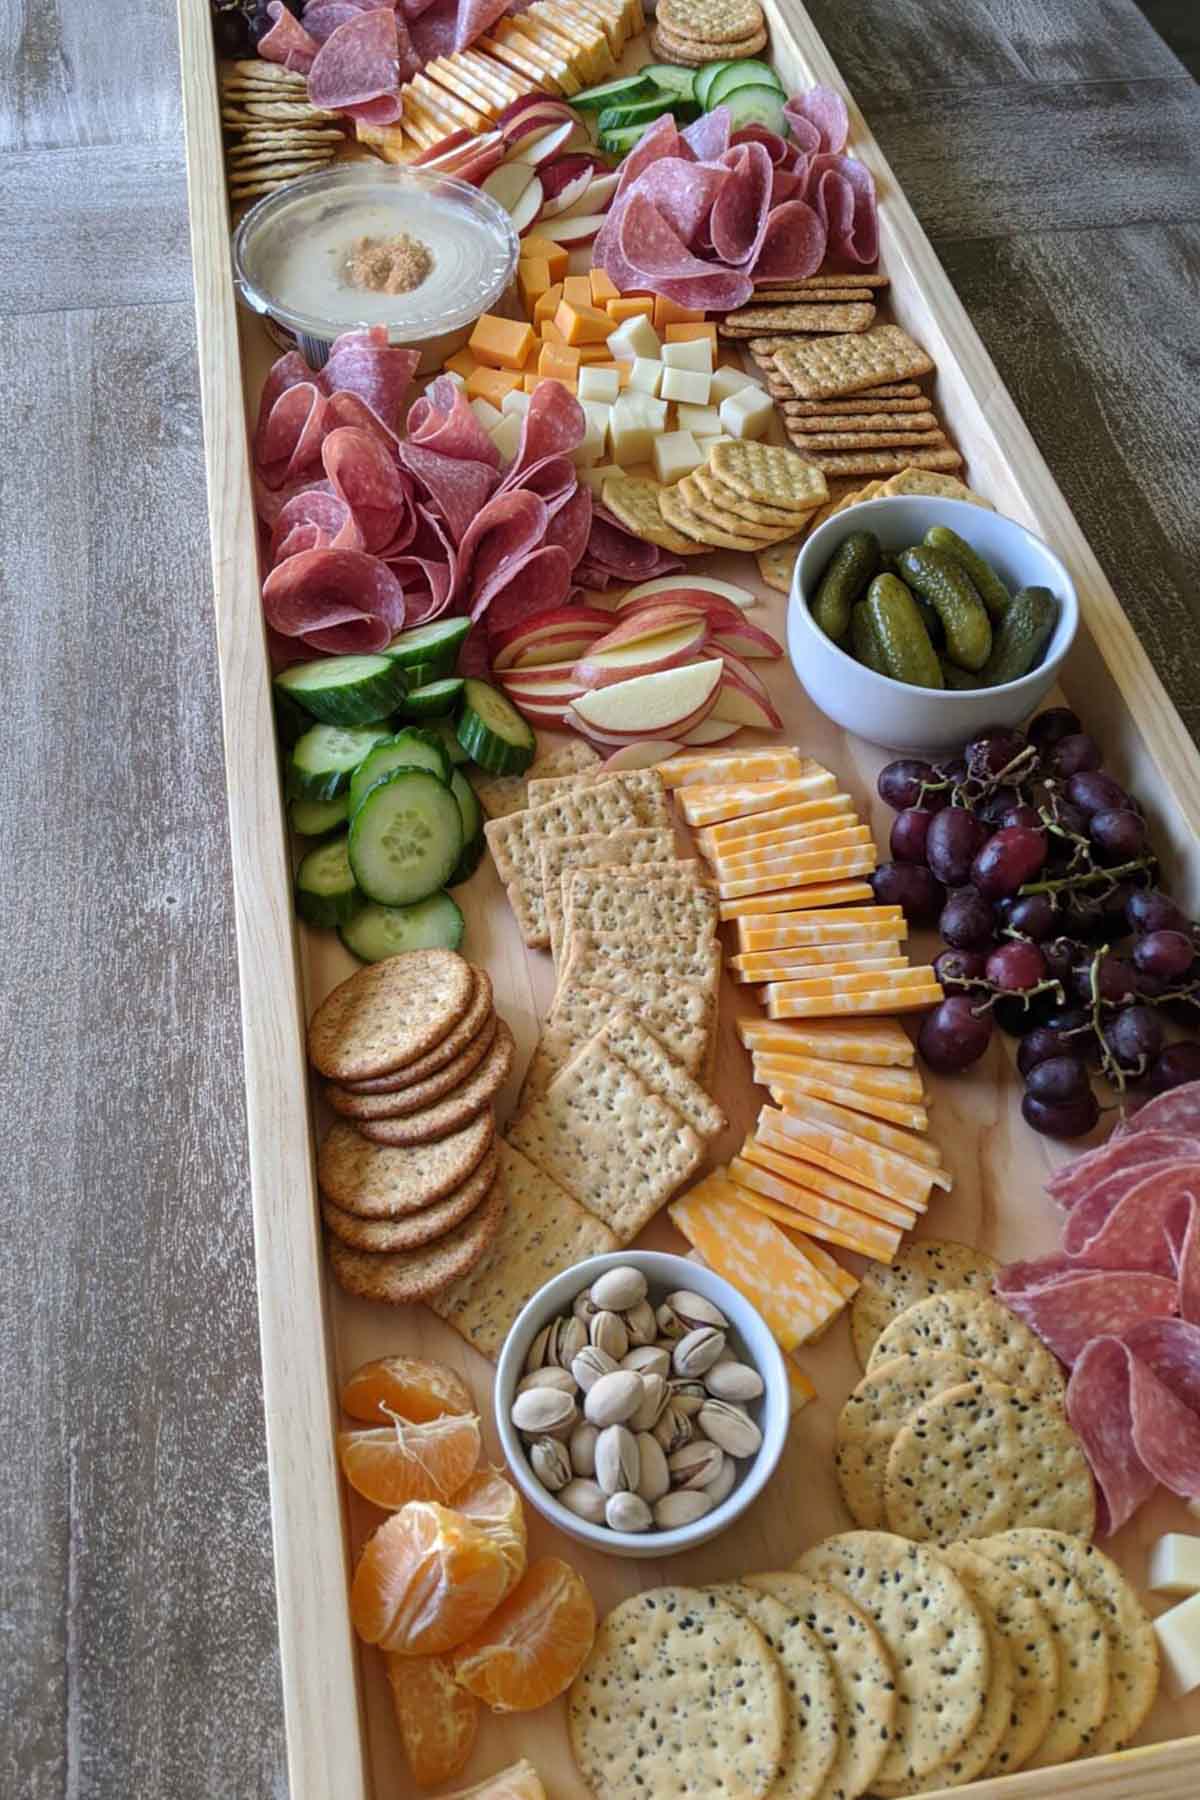 Long charcuterie board with meat, cheese, crackers, and various foods.